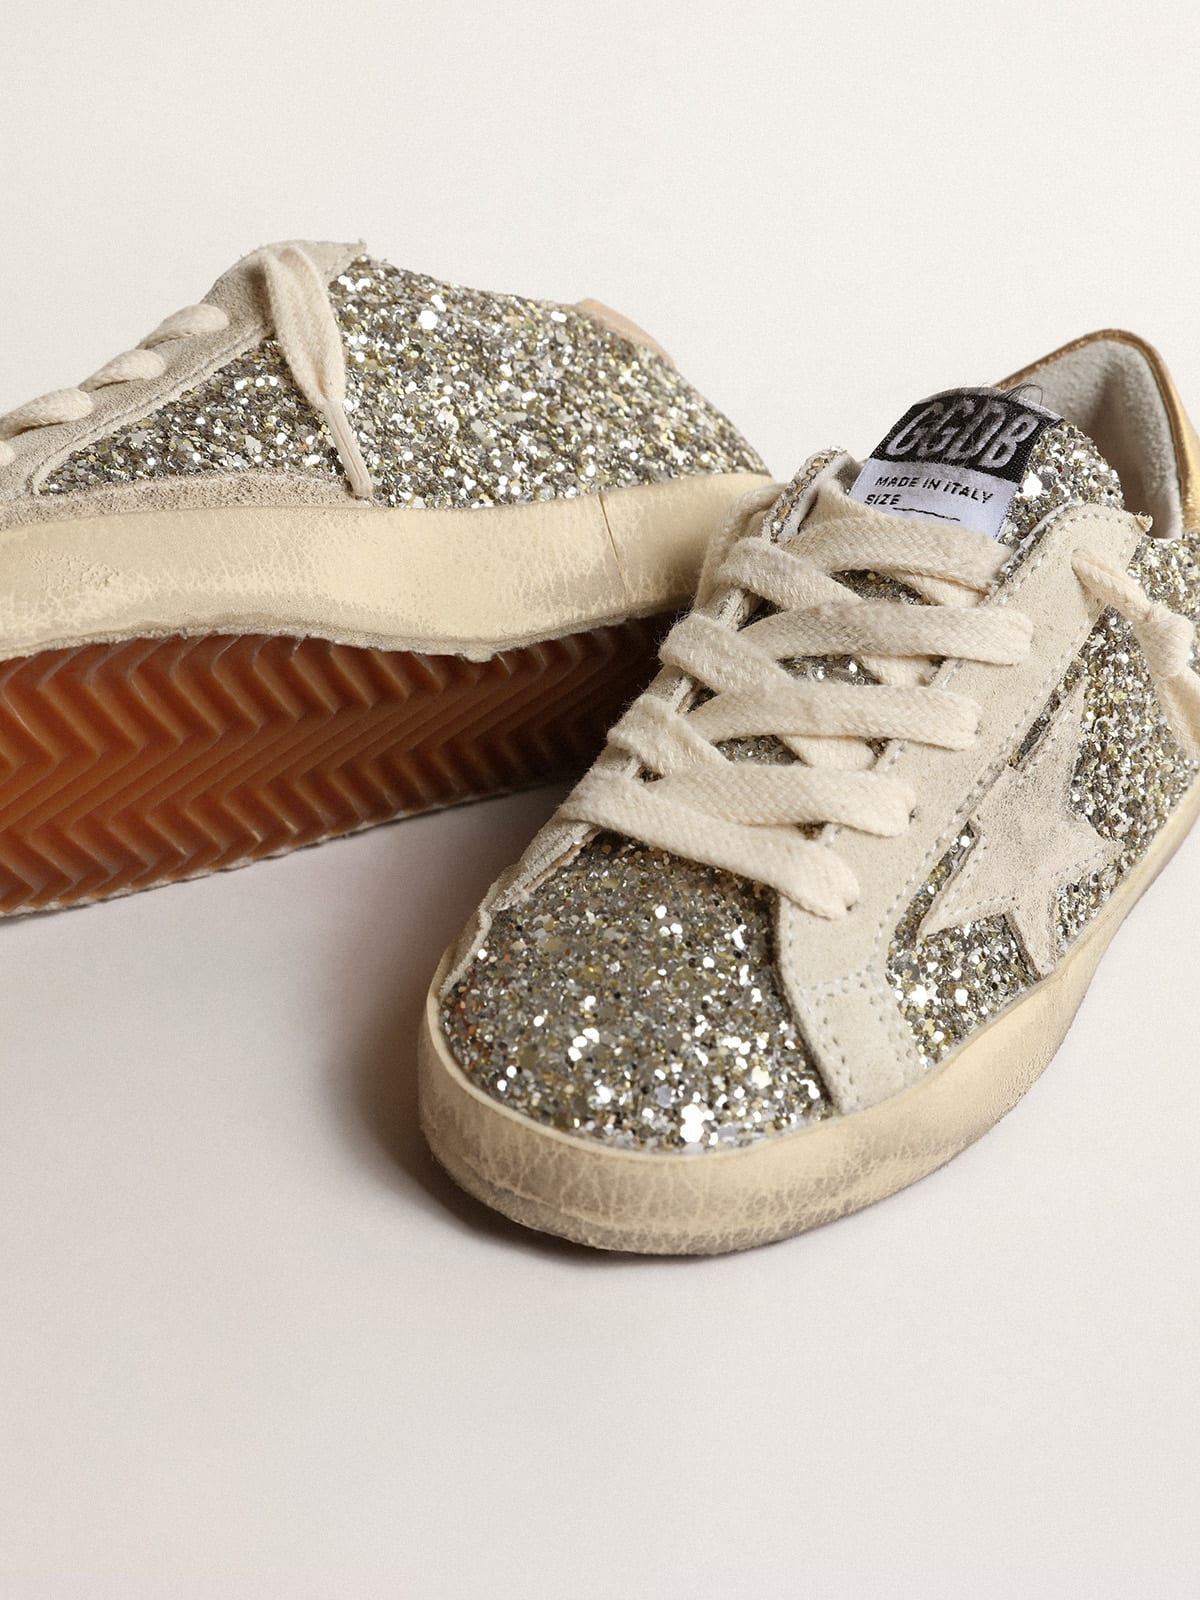 Golden Goose - Super-Star Junior in glitter with a suede star and gold heel tab in 